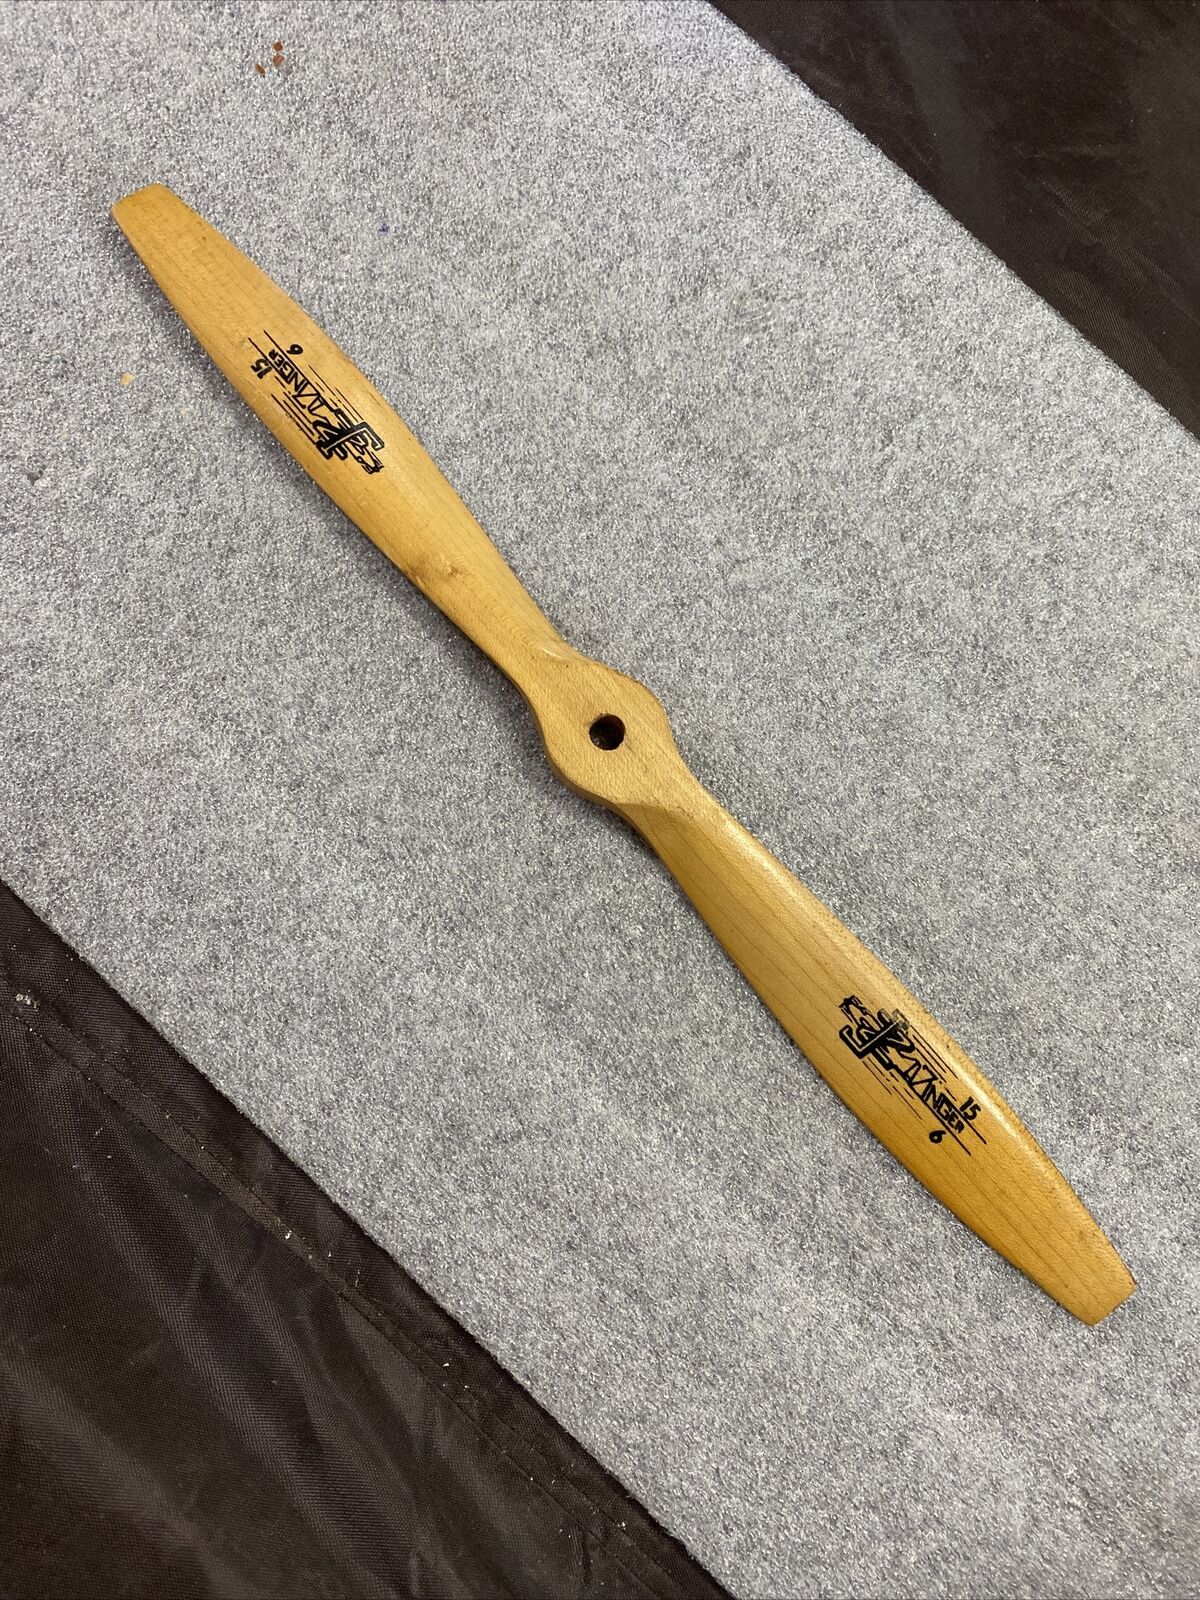 wholesale JZ Zinger Wood Oklahoma City Mall 15 X 6 Propeller For NOS Model Airplanes